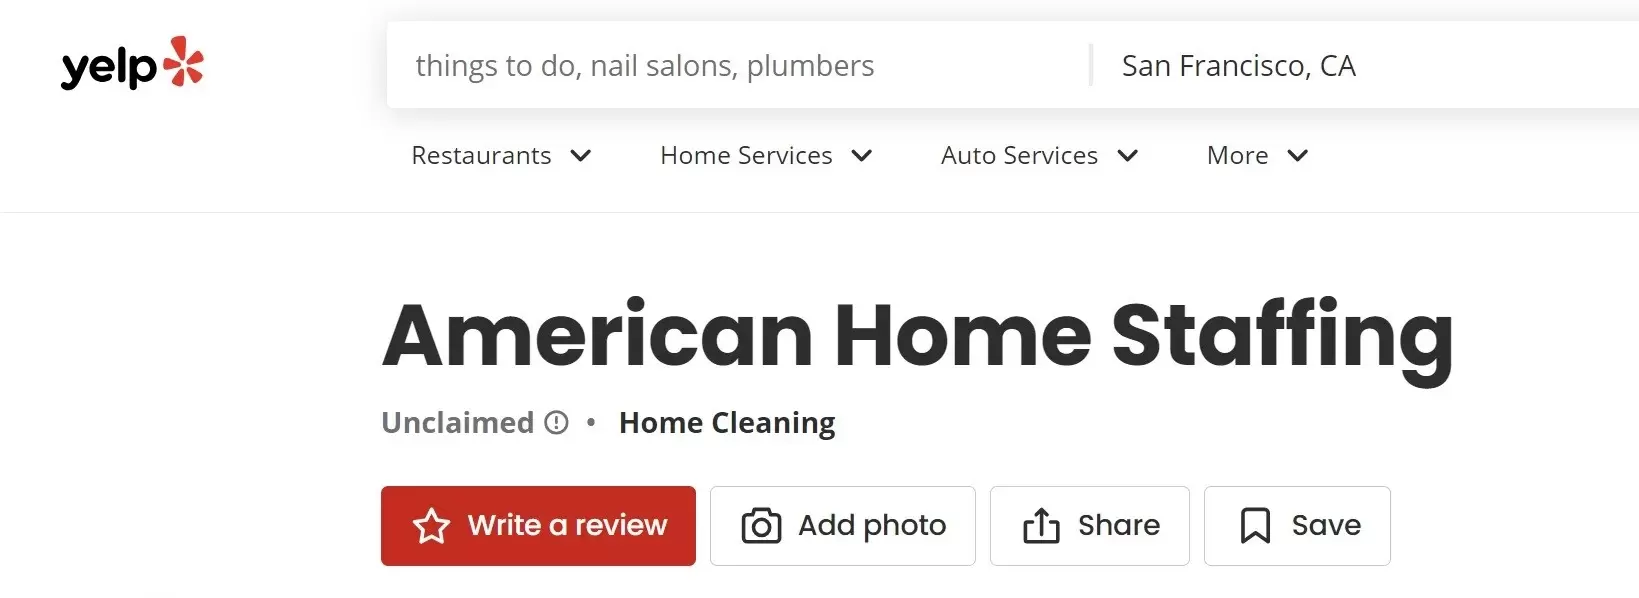 American Home Staffing on Yelp